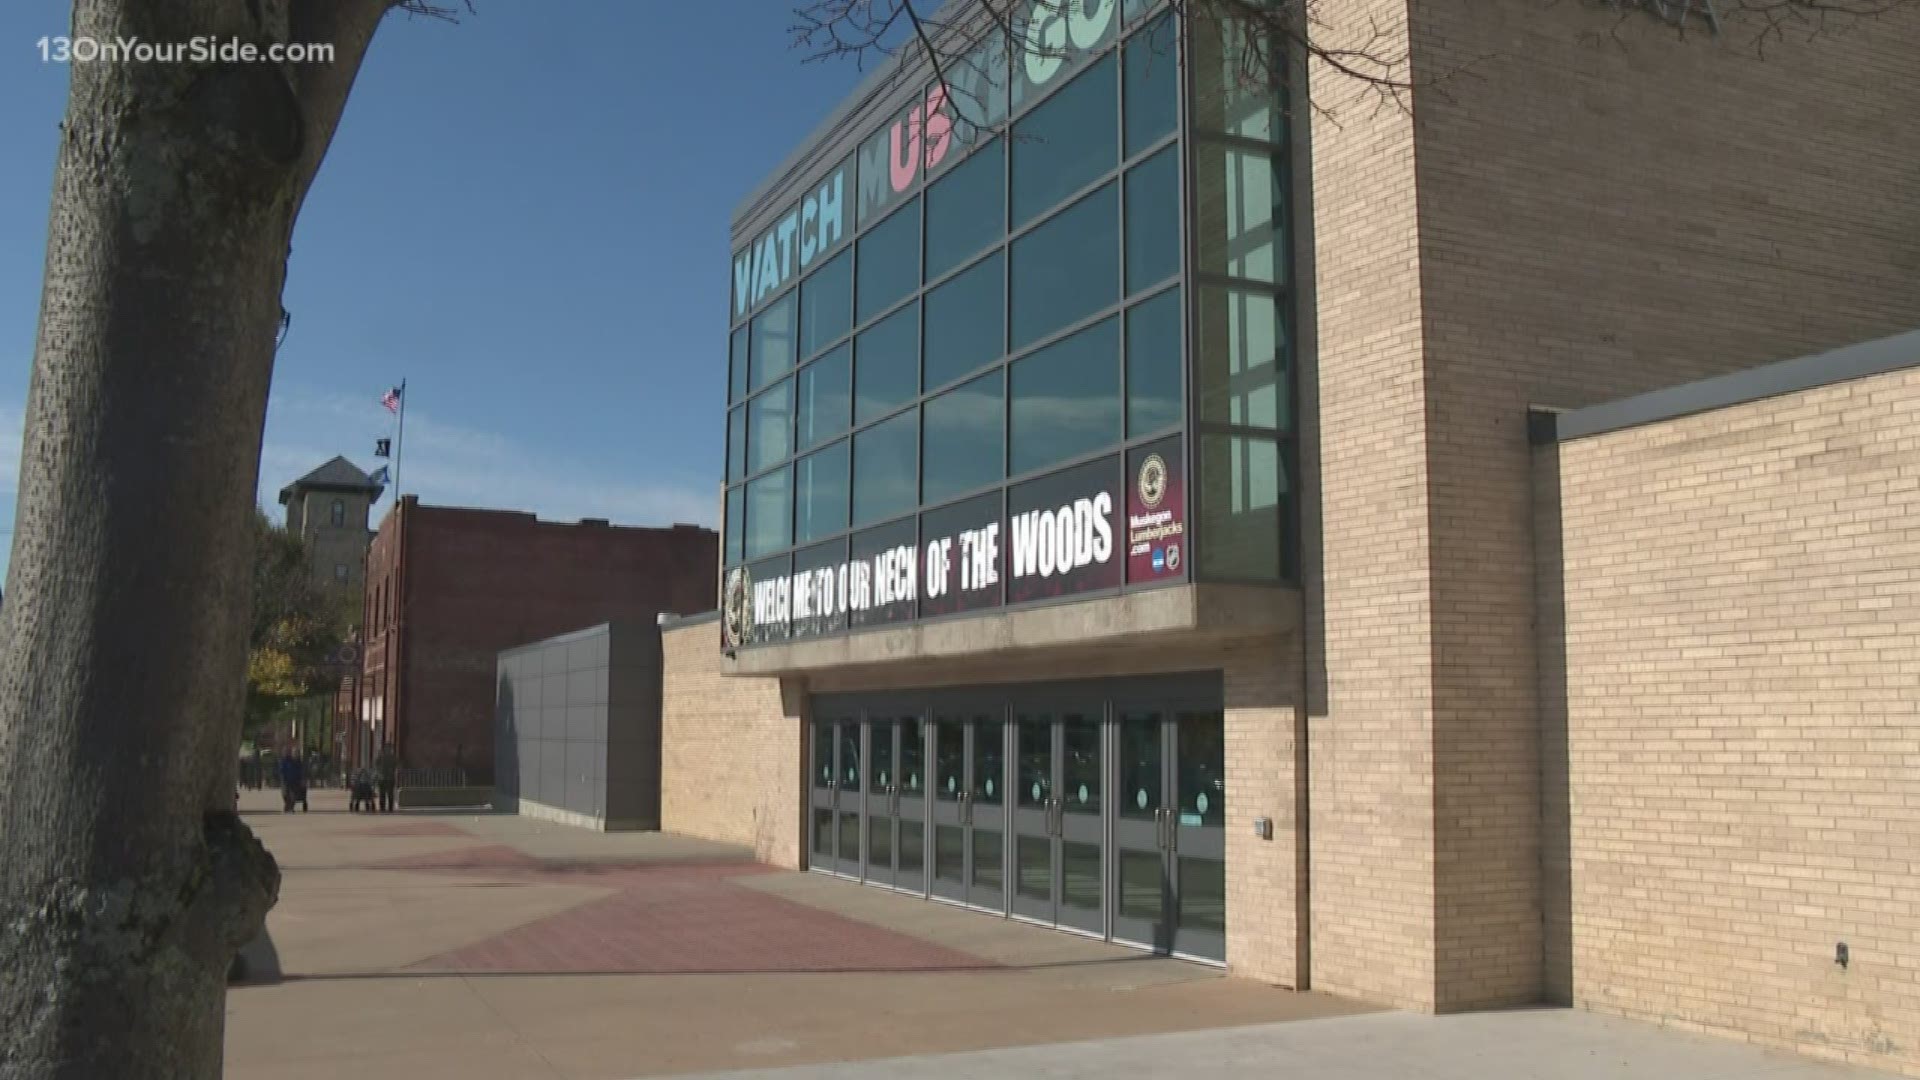 The L.C. Walker Arena in Muskegon was recently bought by Mercy Health and with the new owners, came news of a name change.